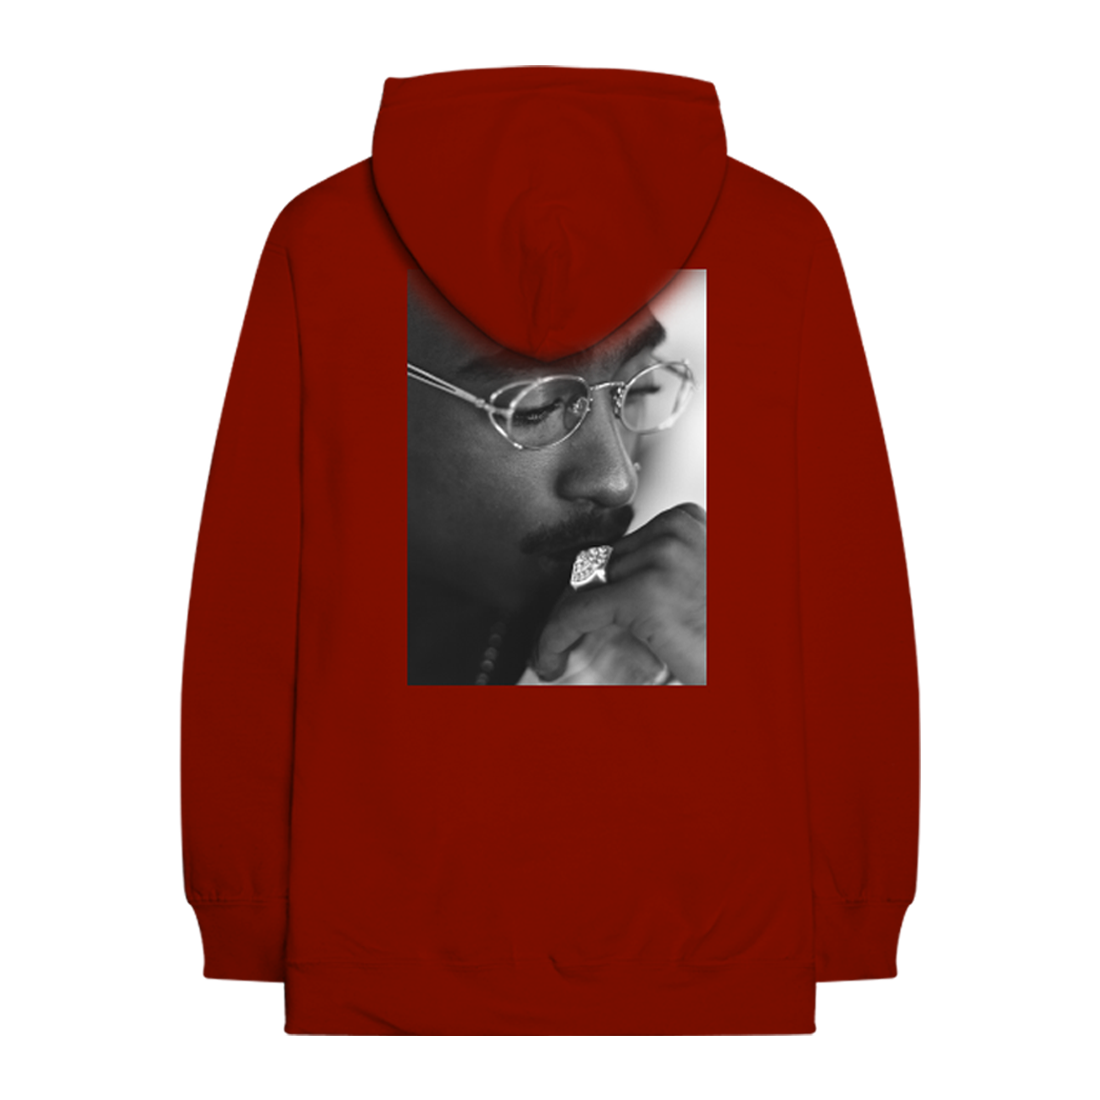 Trees Hoodie (Maroon) - Apparel 2PAC OFFICIAL MERCHANDISE STORE - T-SHIRT - ALBUMS - LYRICS - CHANGES - MOVIE - MERCH - QUOTES - TUPAC - POEMS - POETRY